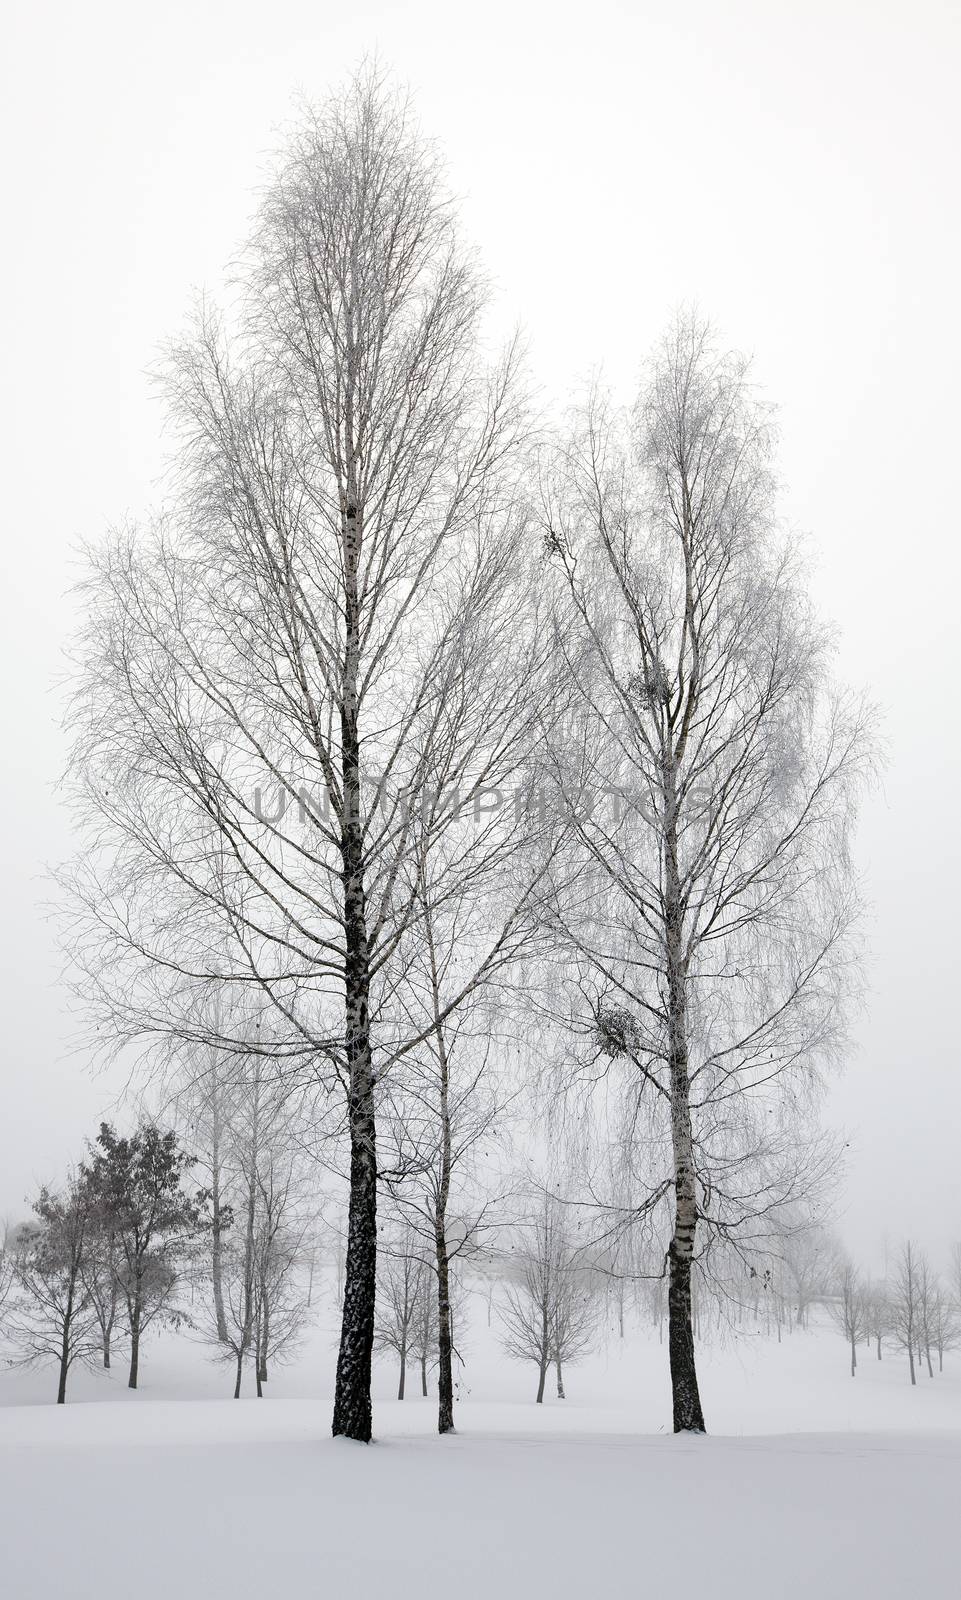 trees growing in the forest in winter